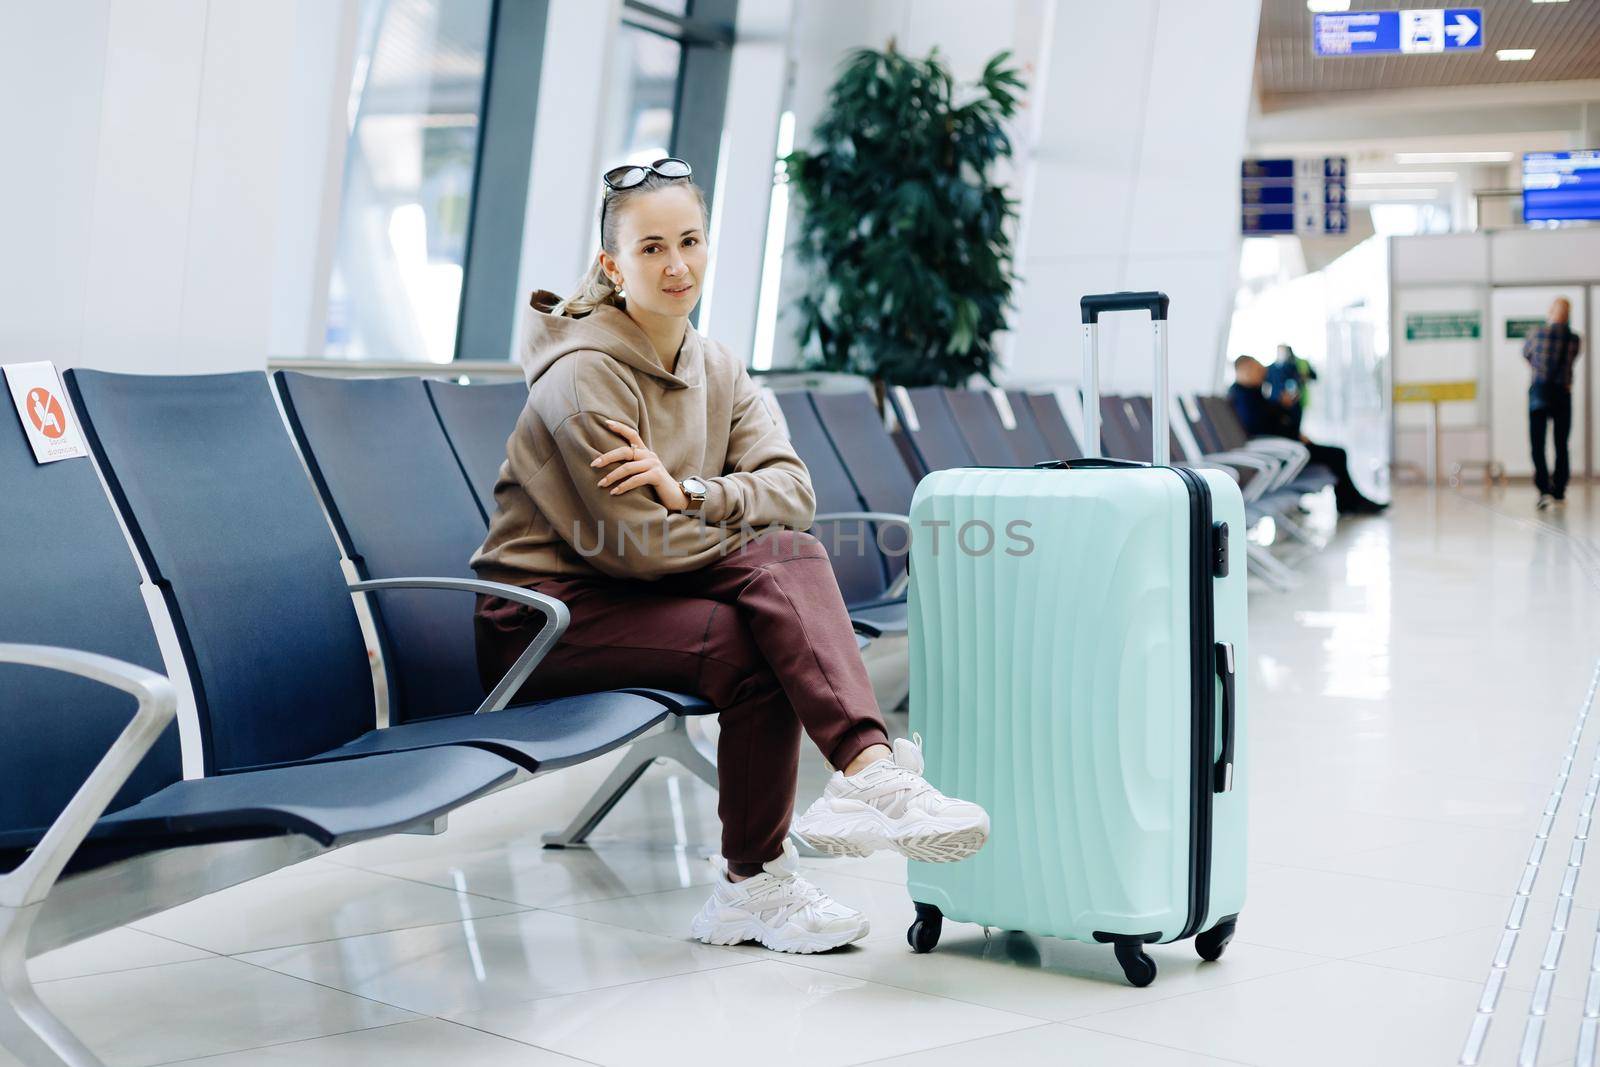 female tourist with luggage sitting in the airport waiting room .